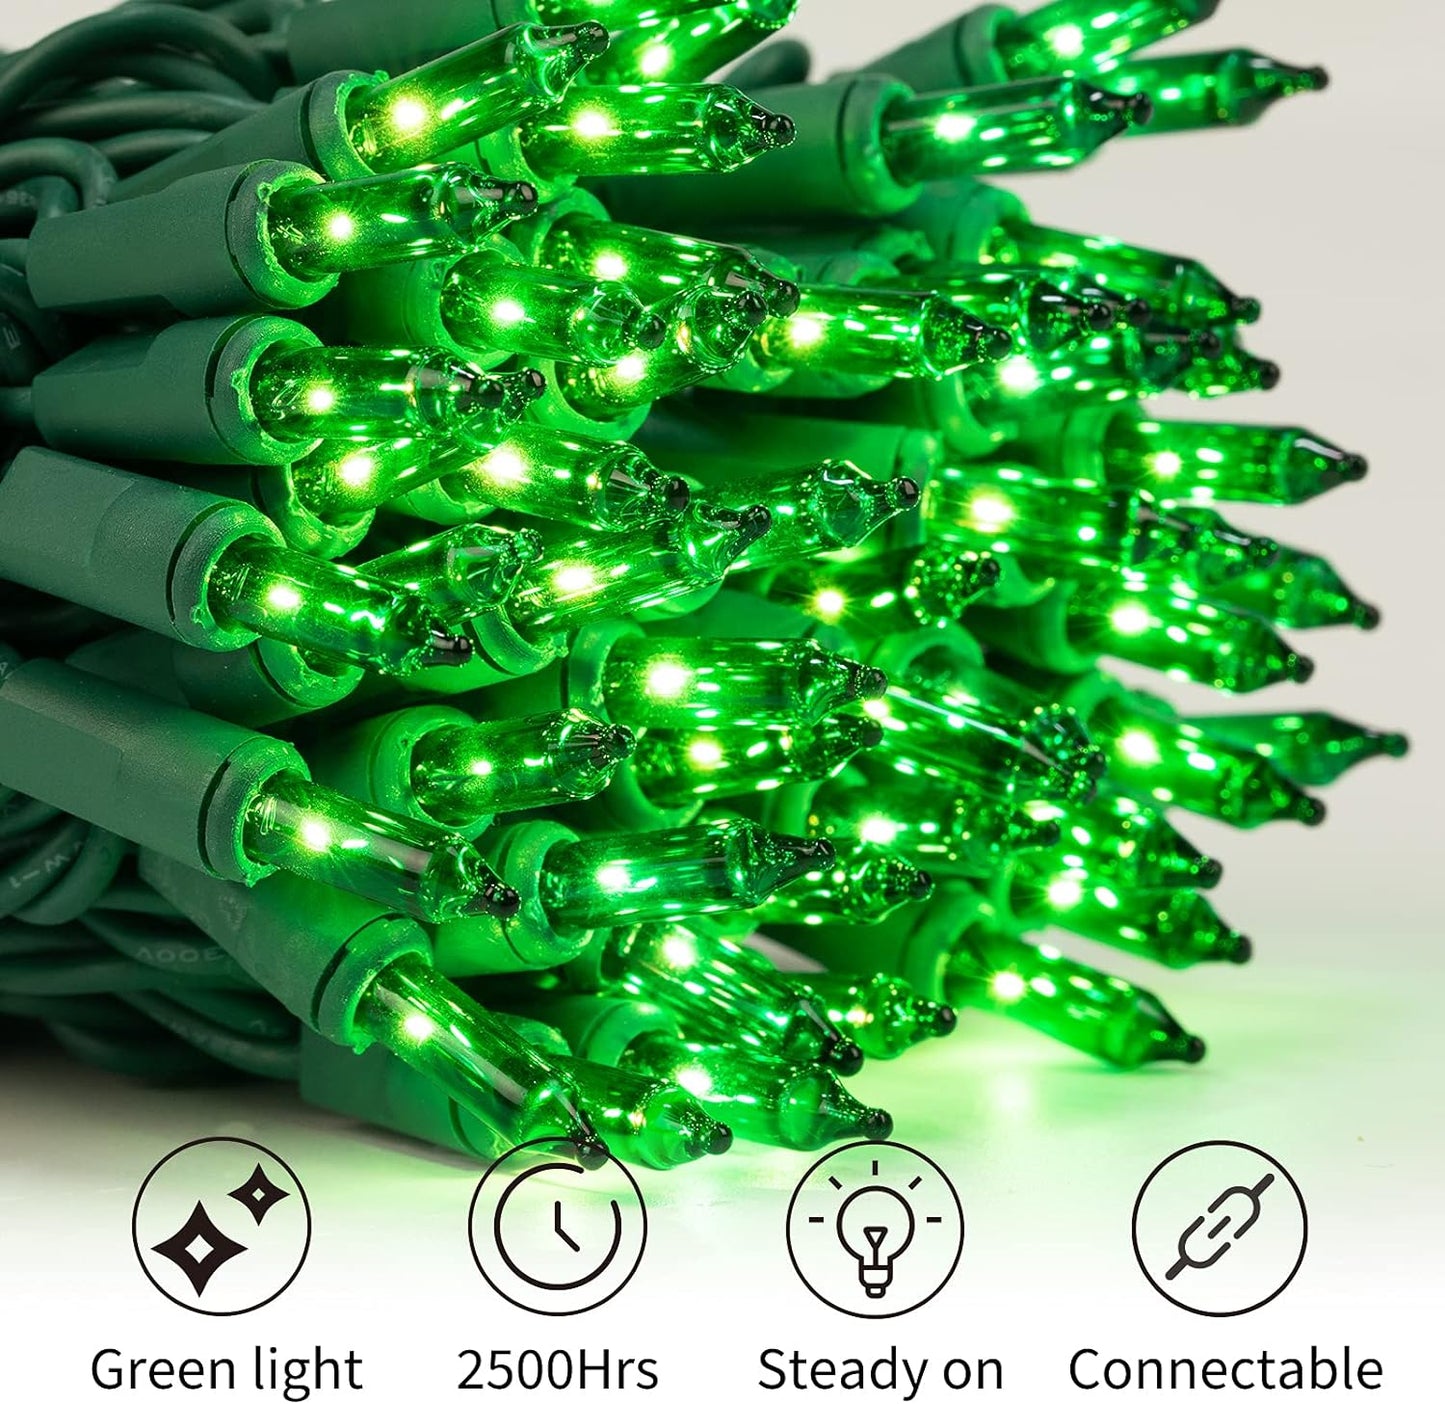 Minetom St. Patrick's Day Mini String Lights, 100 Count 27 Feet Detachable Incandescent Bulb Waterproof Green Fairy Lights Plug in for Indoor Outdoor Party Patio Christmas Decoration, Green Wire